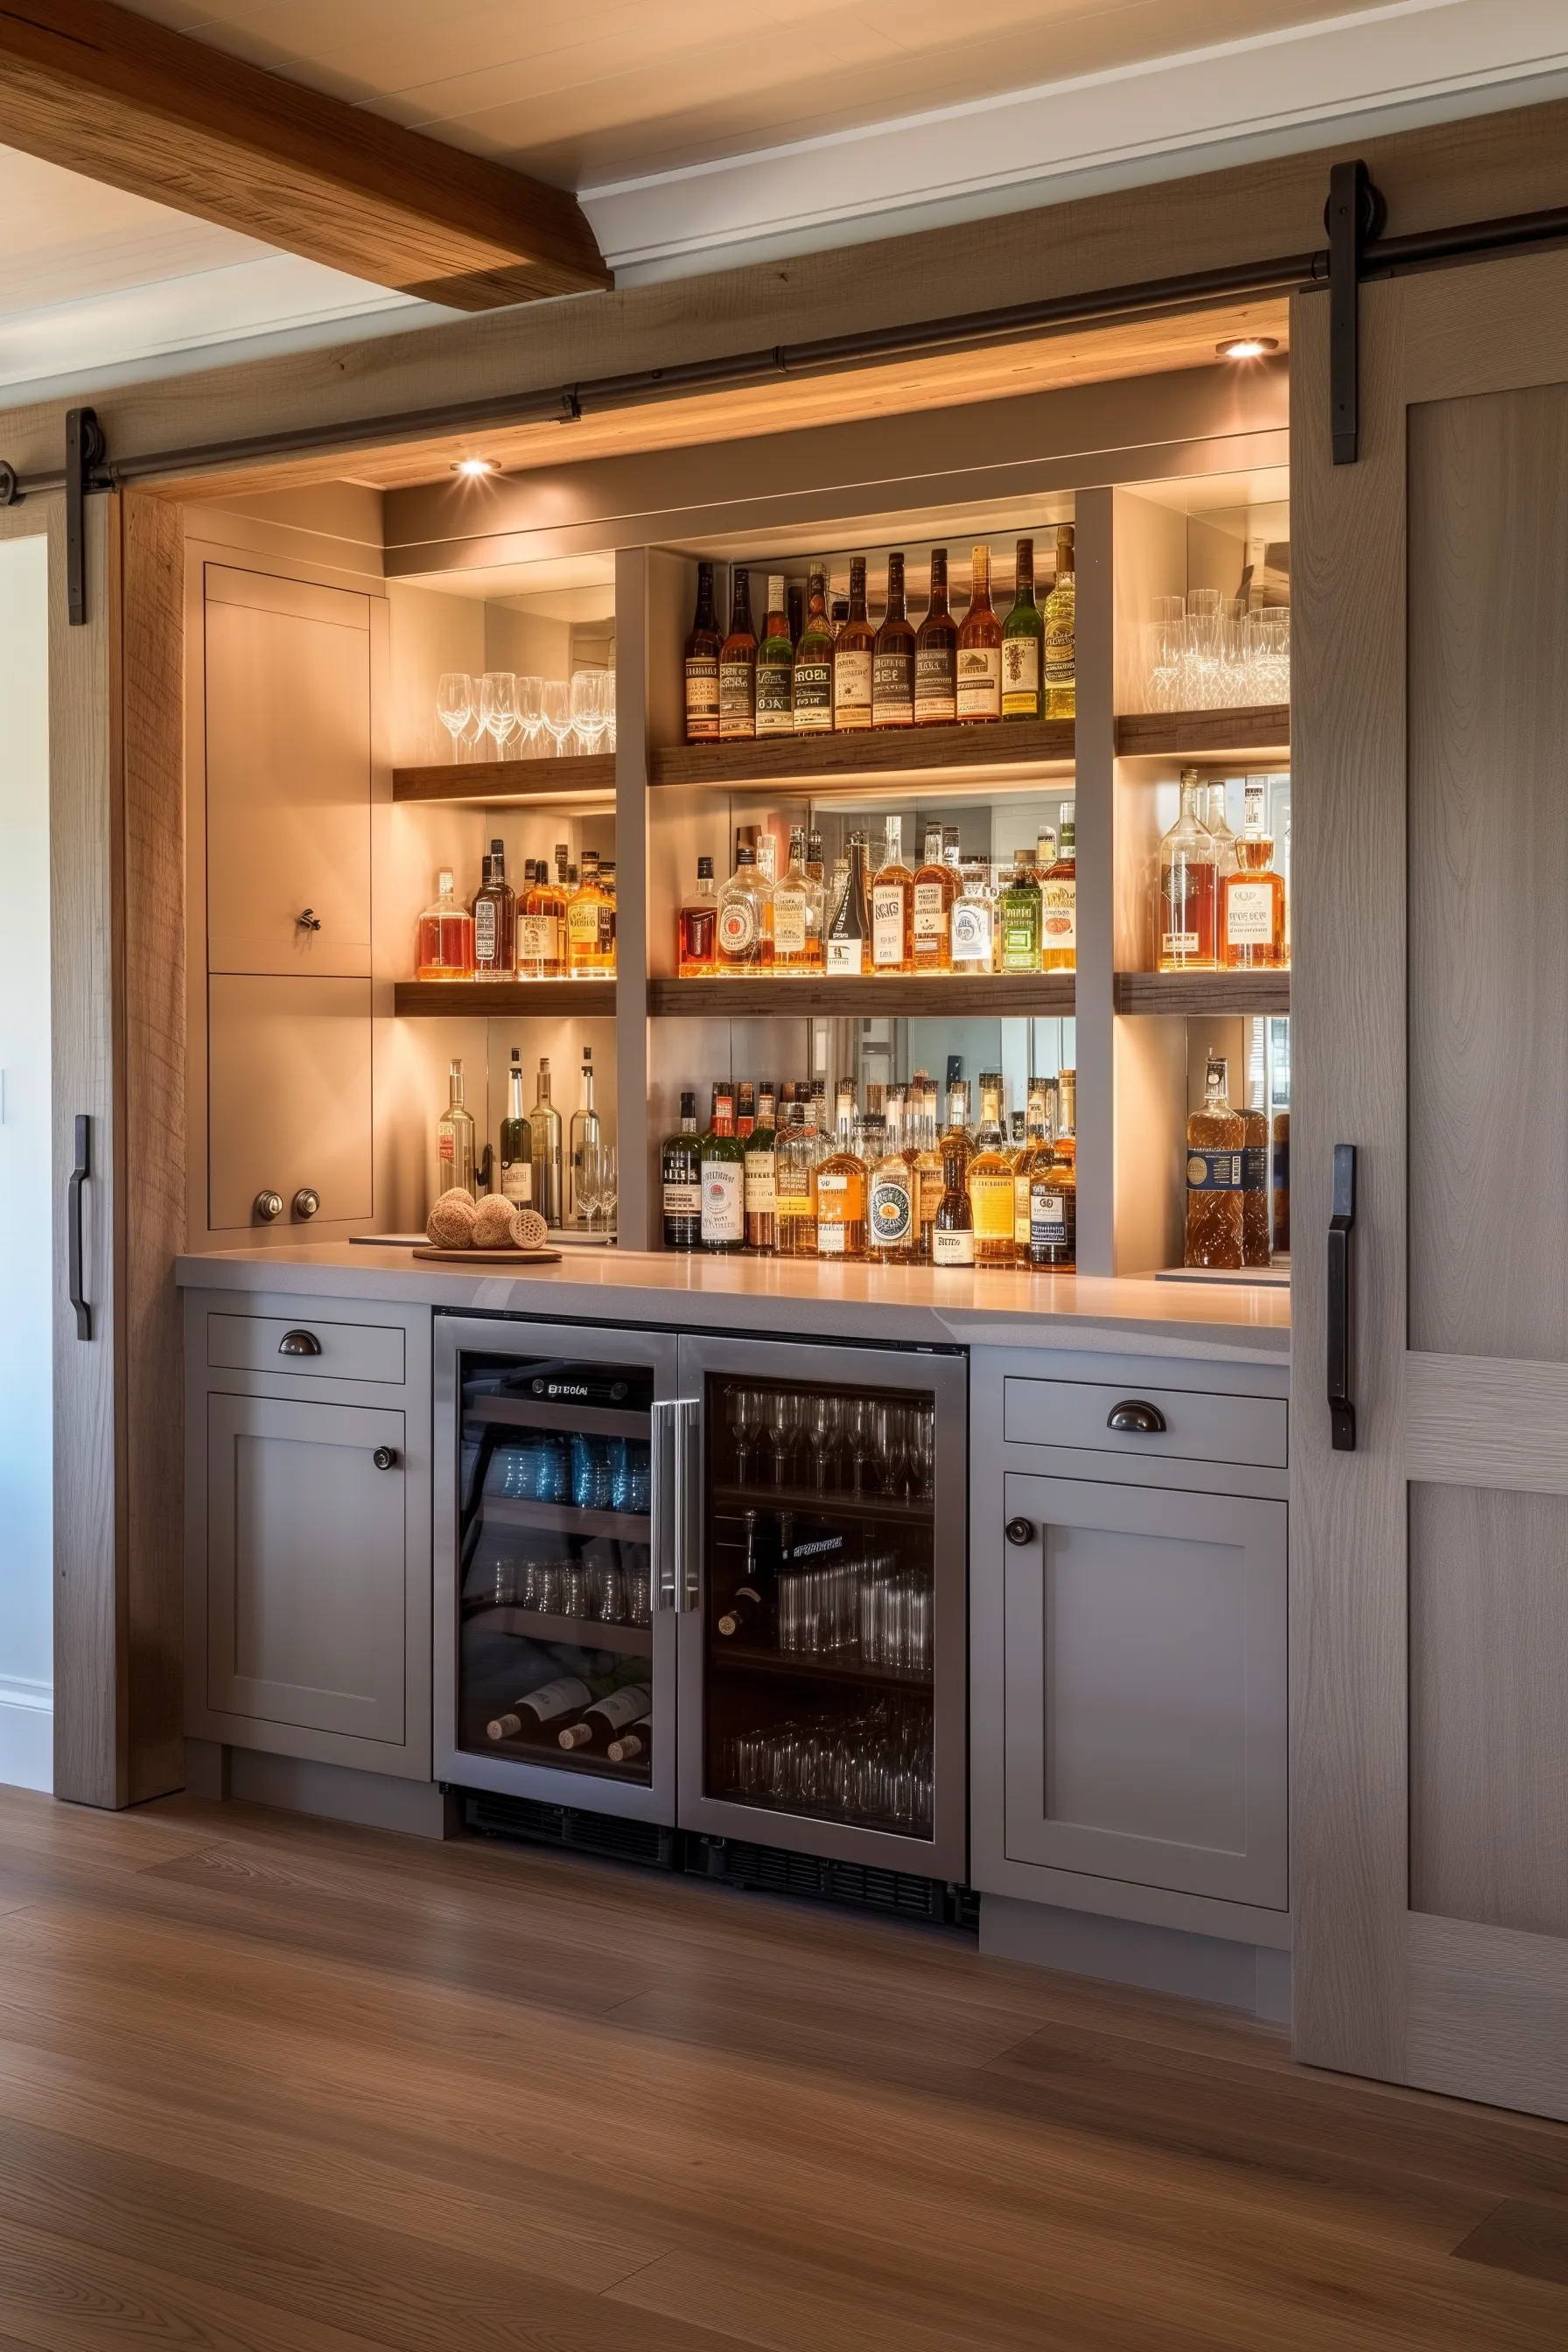 A wooden bar with sliding doors